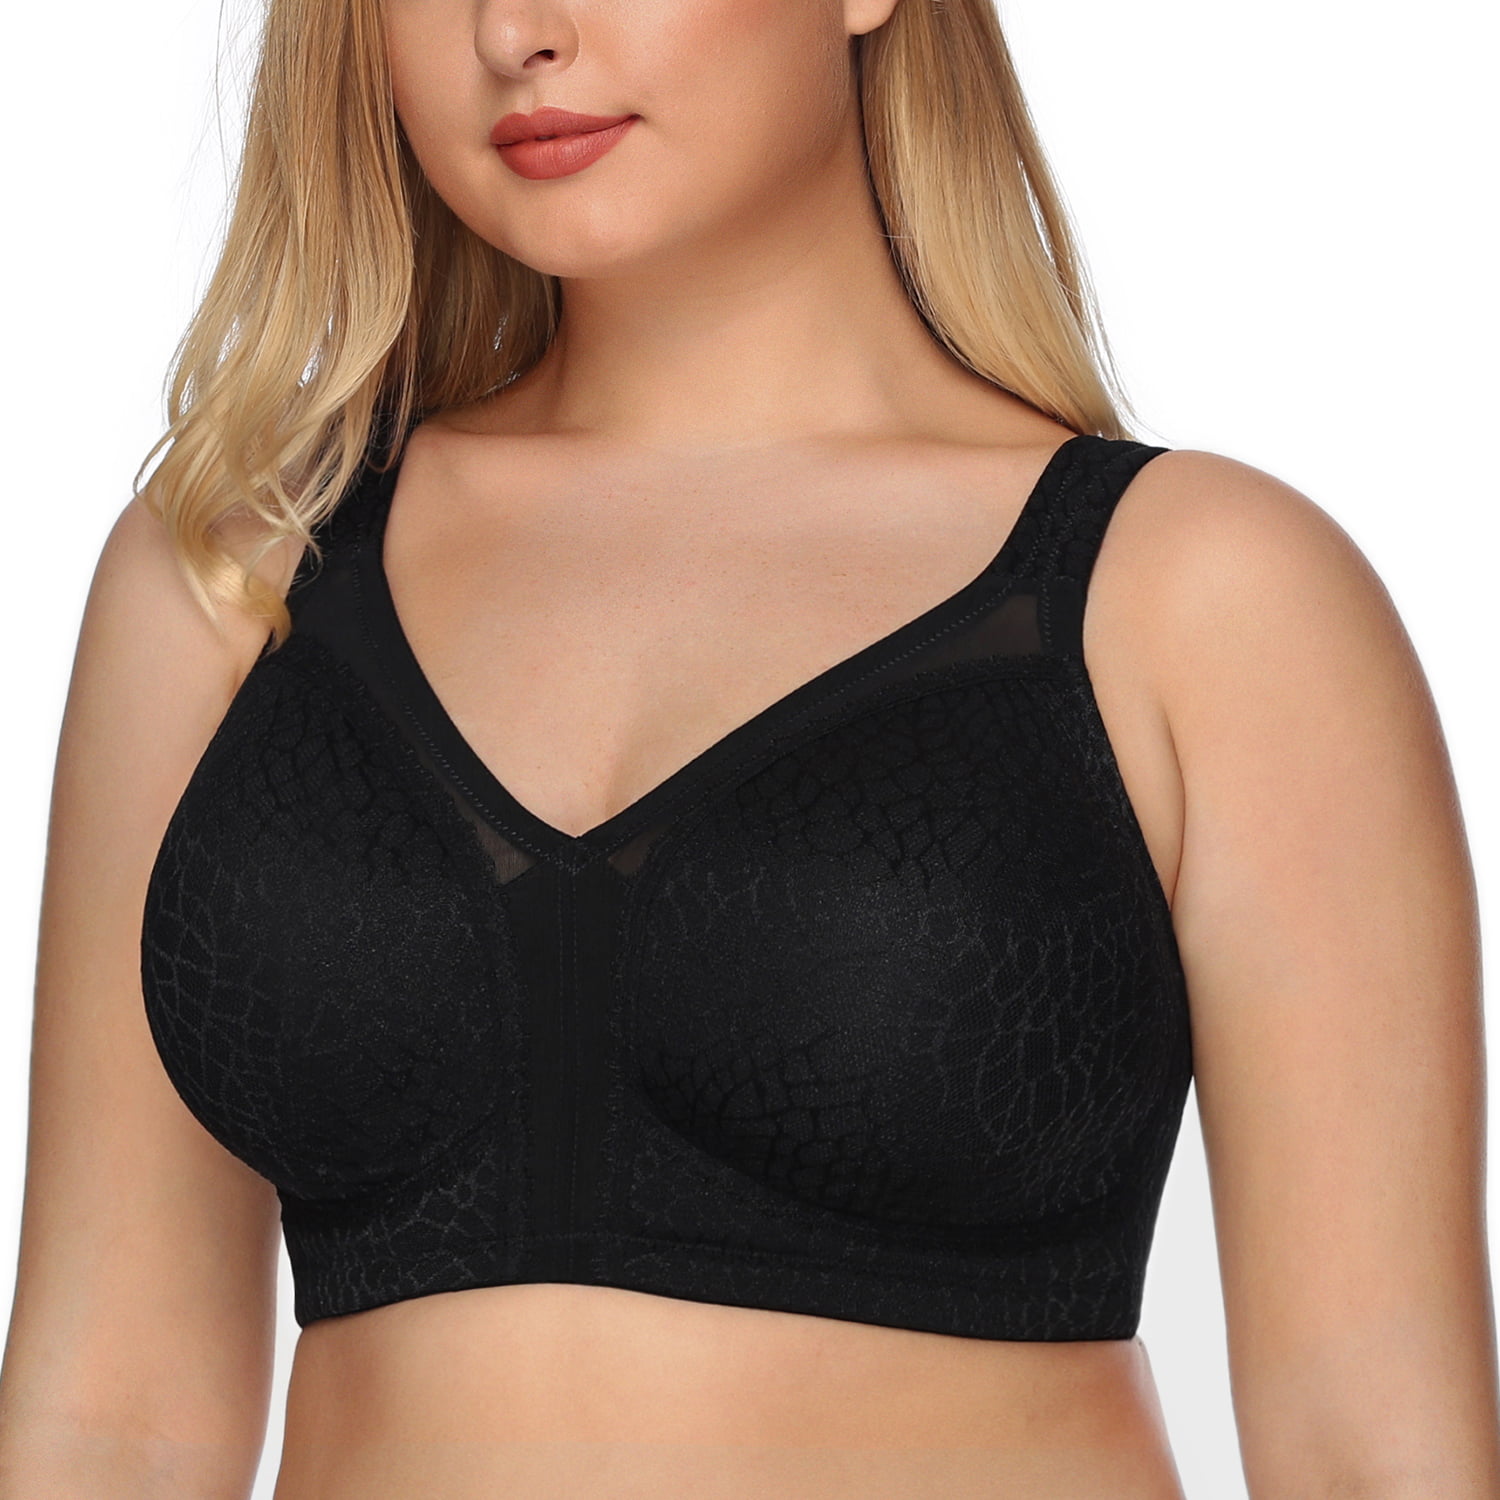 munching turnering Menagerry Exclare Women's Plus Size Comfort Full Coverage Double Support Unpadded  Wirefree Minimizer Bra (44DD, Black) - Walmart.com